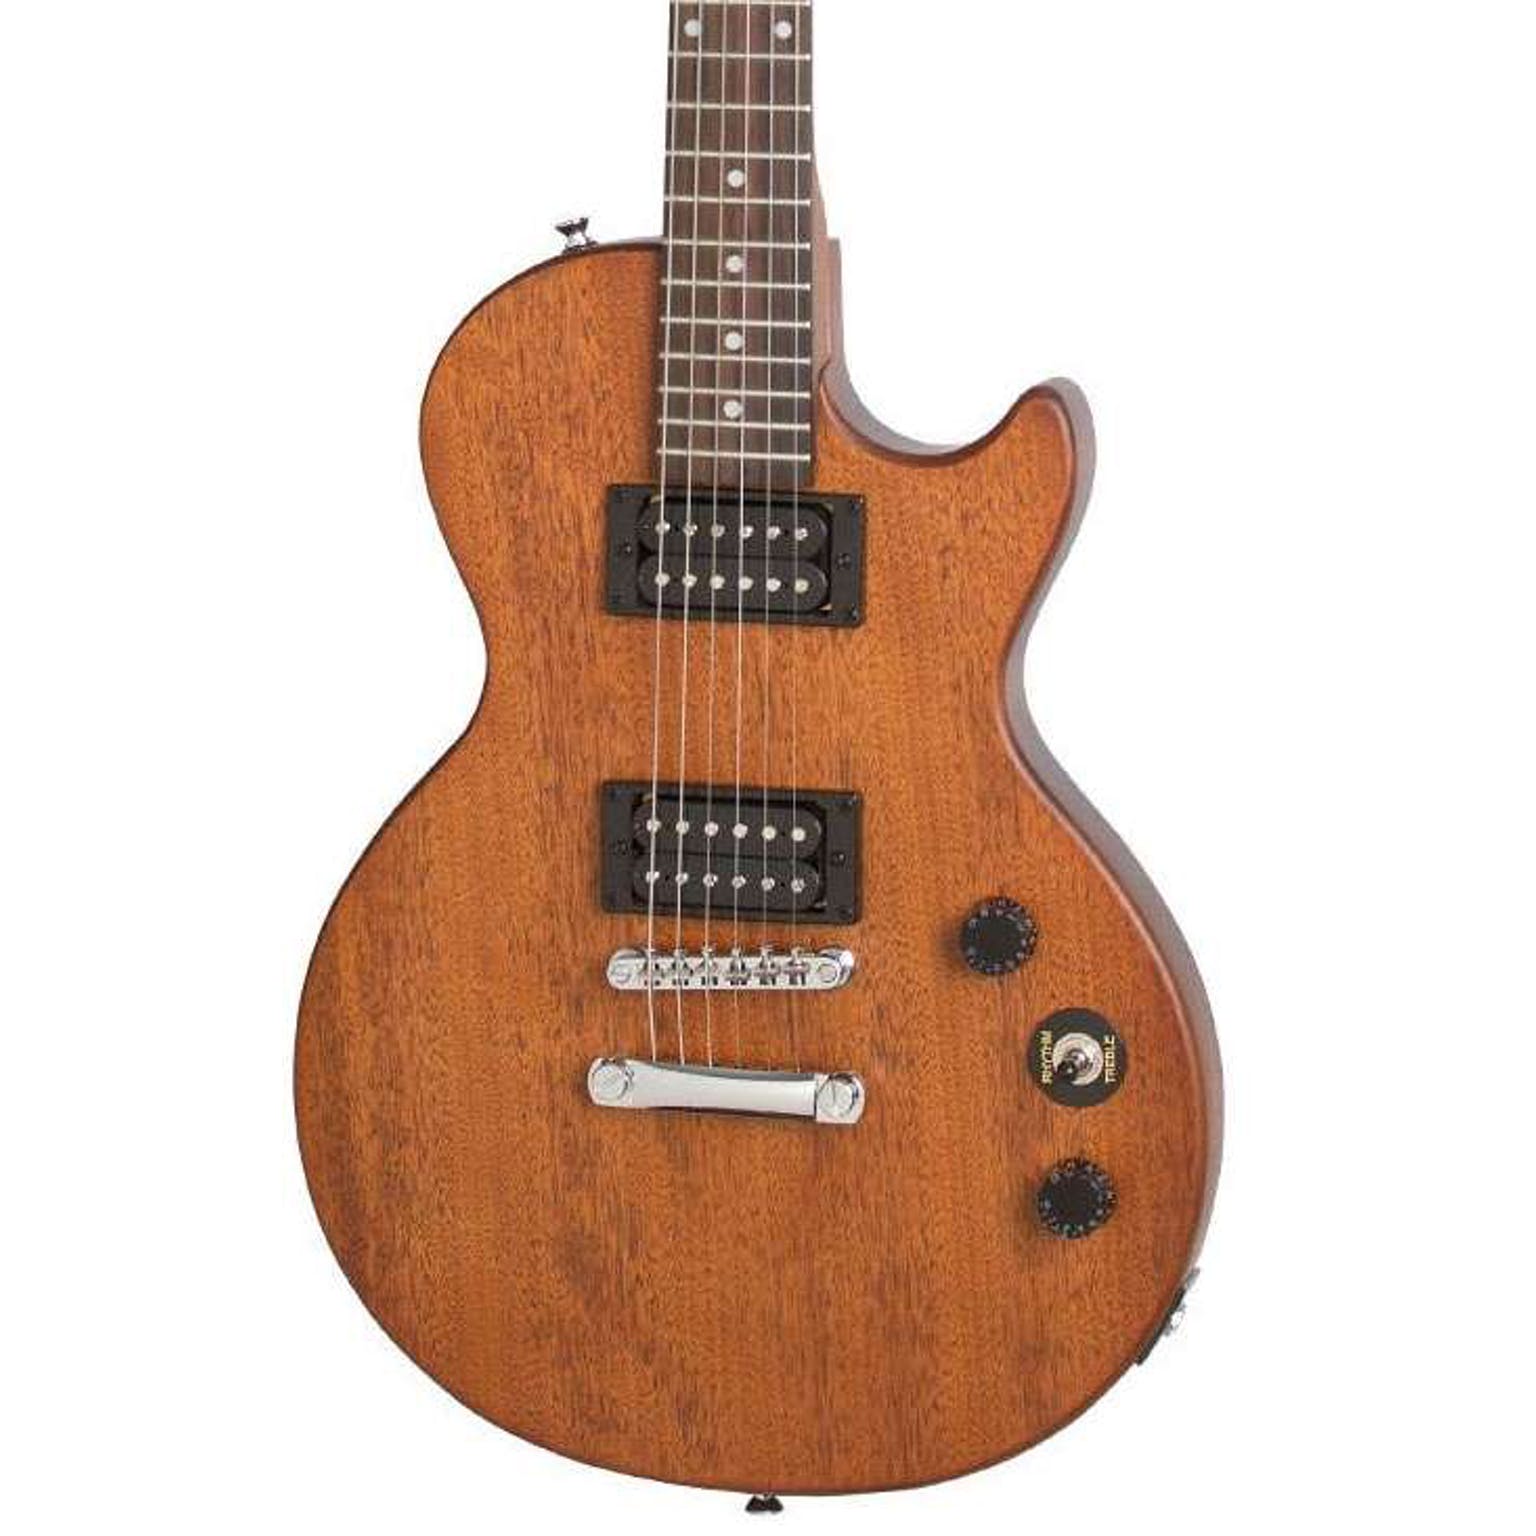 Epiphone レスポールSpecial Vintage Edition - 器材